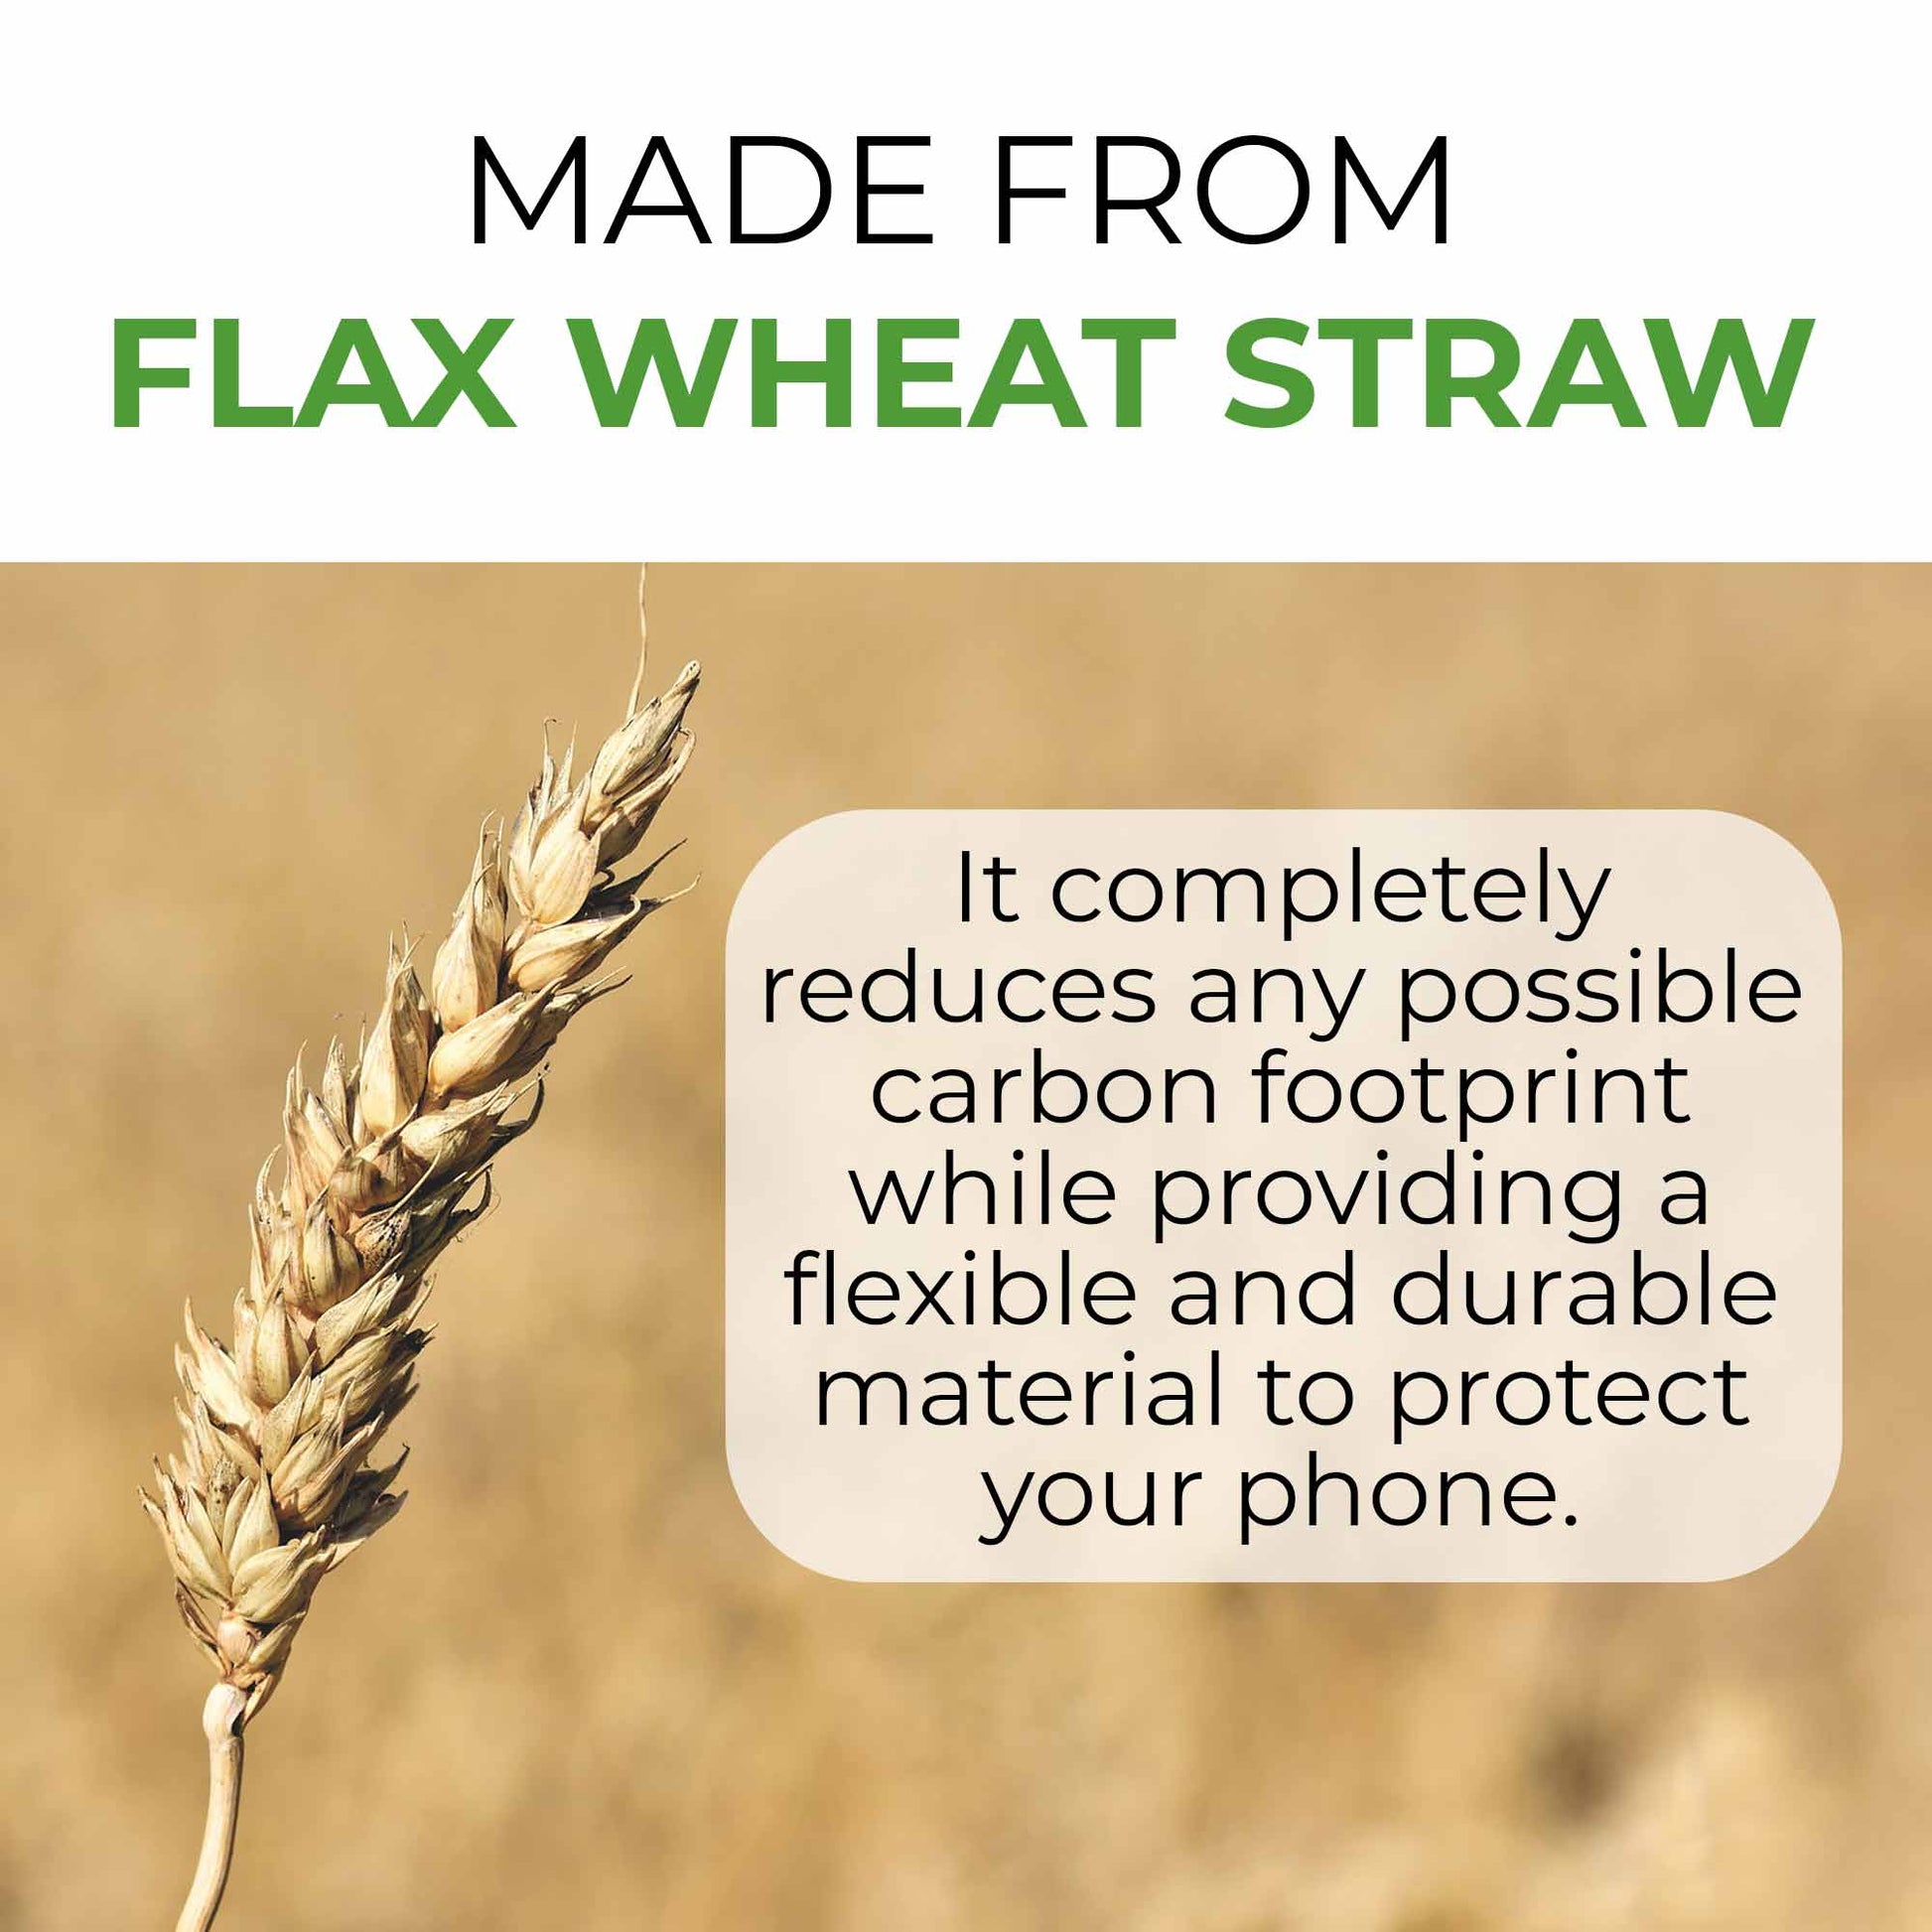 An advertisement banner showcasing a Biodegradable Personalized Iphone Case in Black with text stating it is made from flax wheat straw, highlighting its environmental and durability benefits.